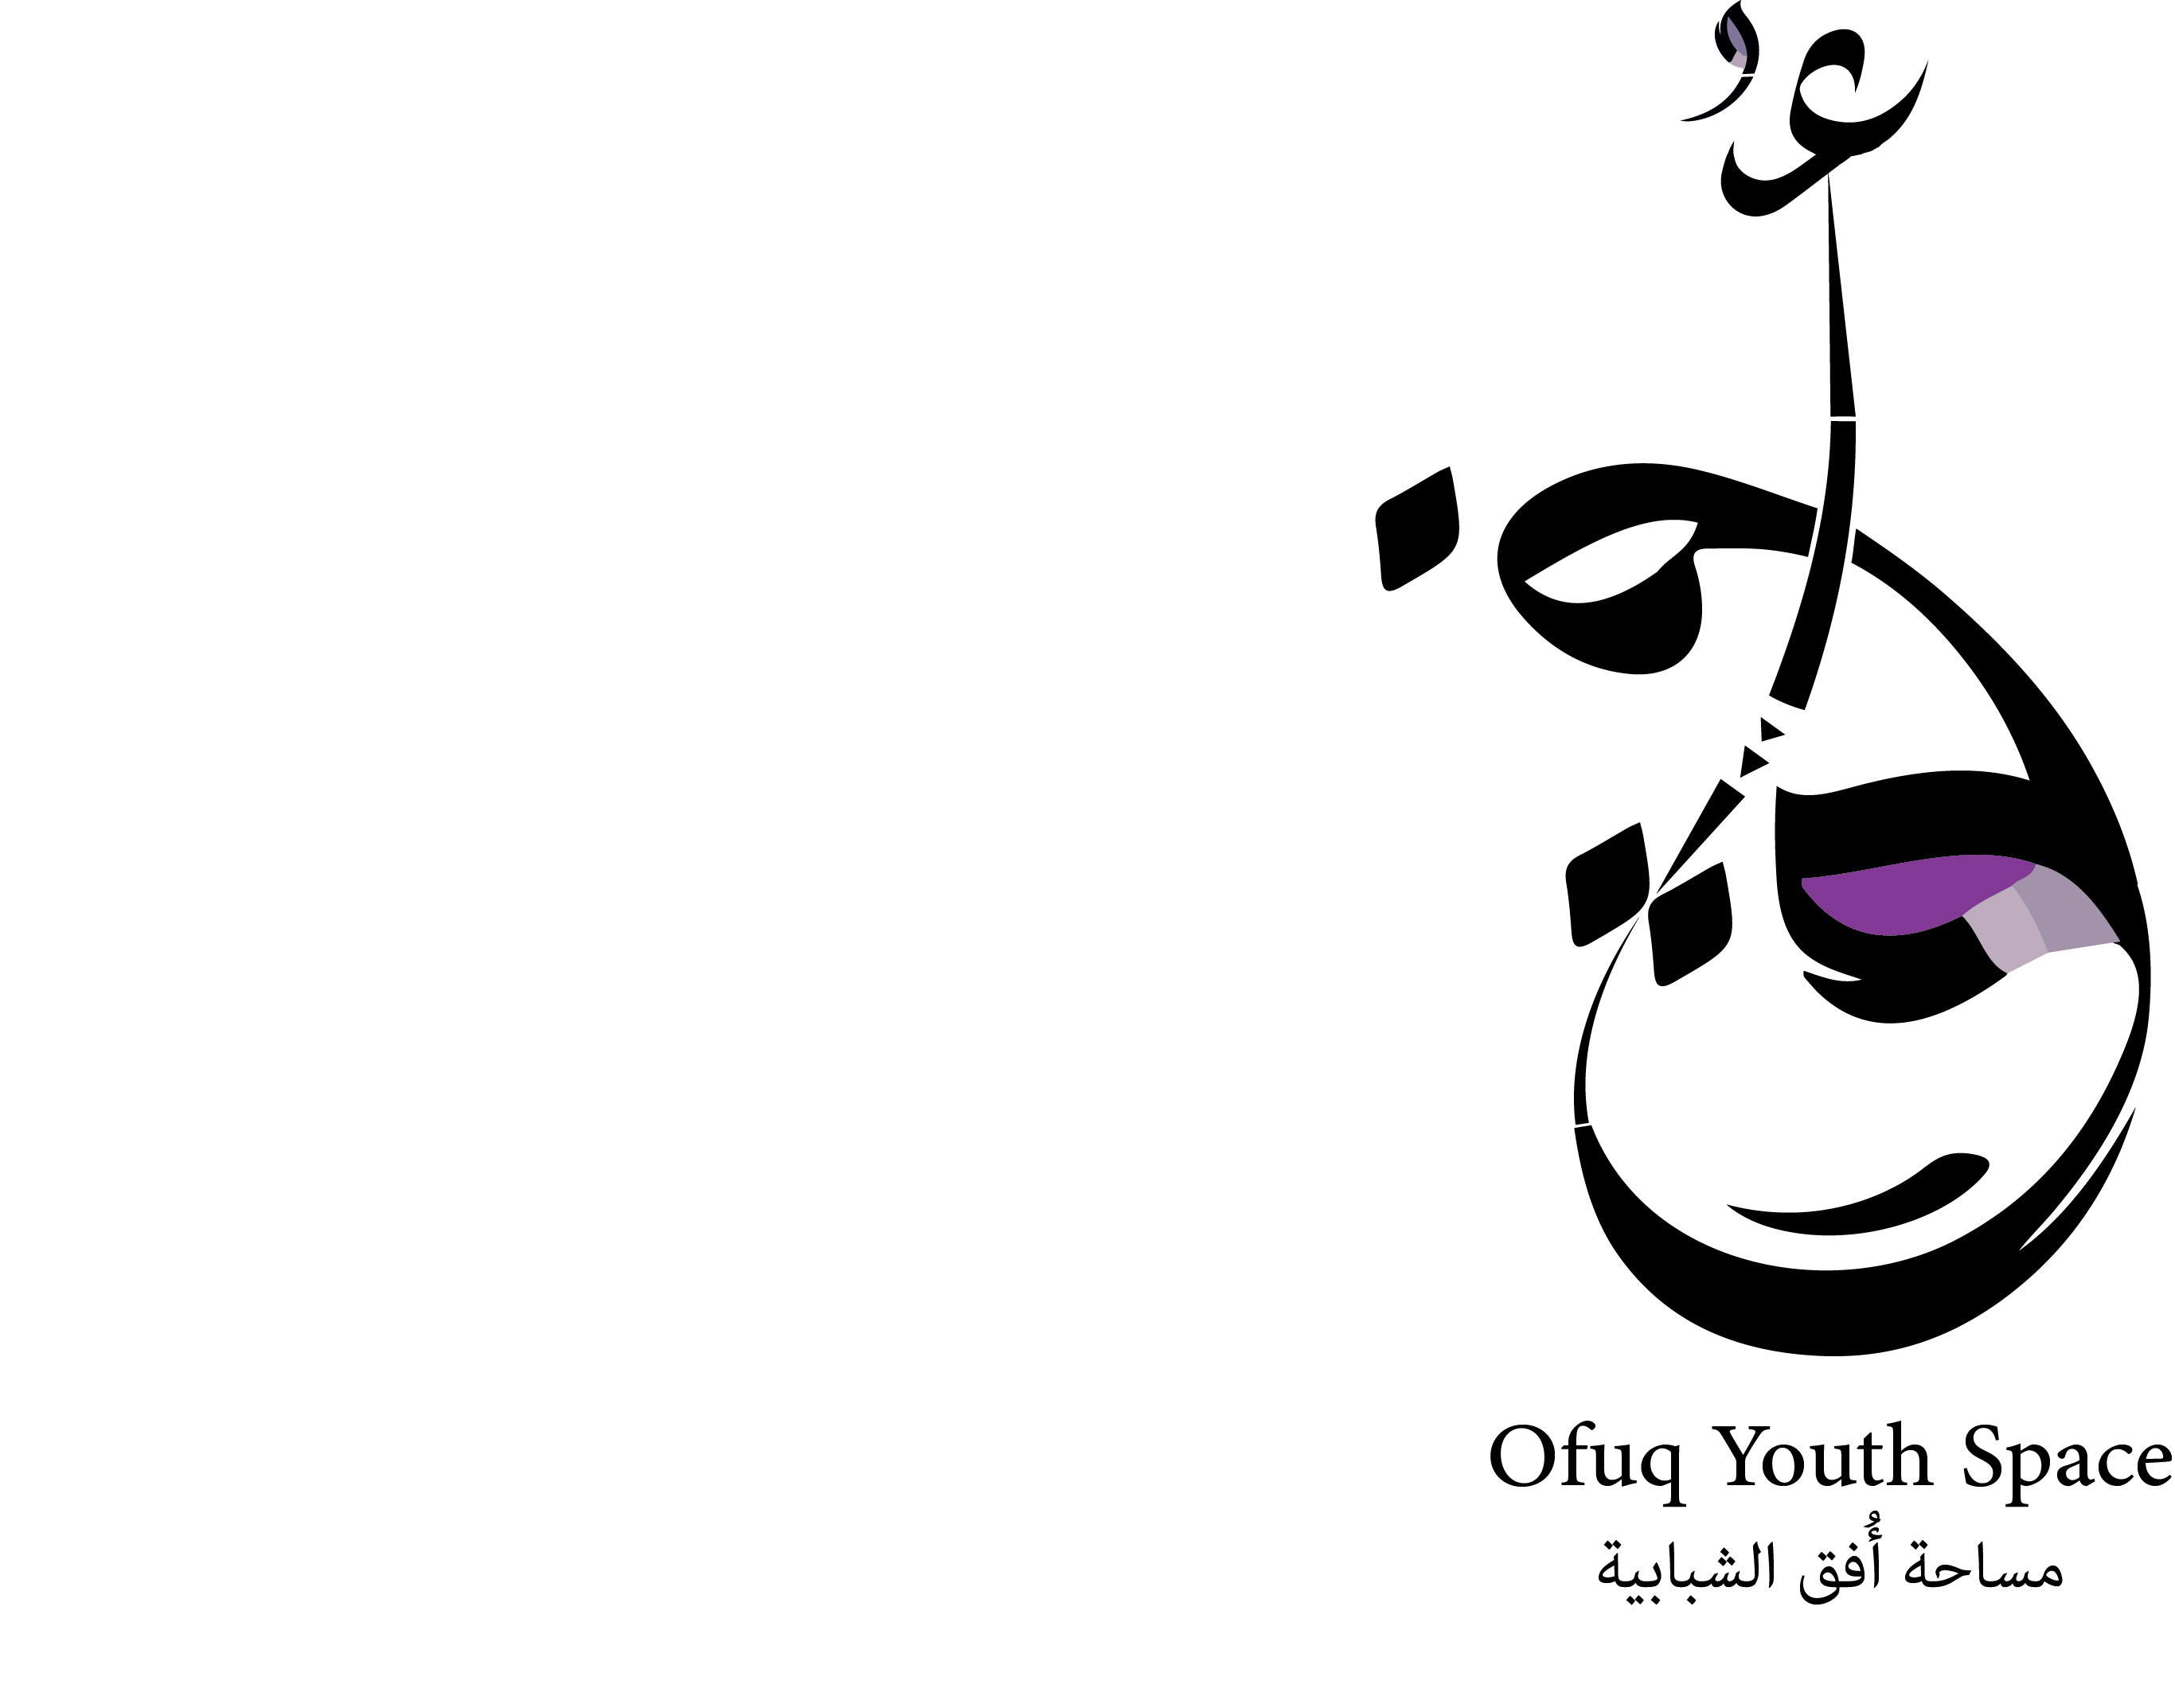 Ofuq Youth Space